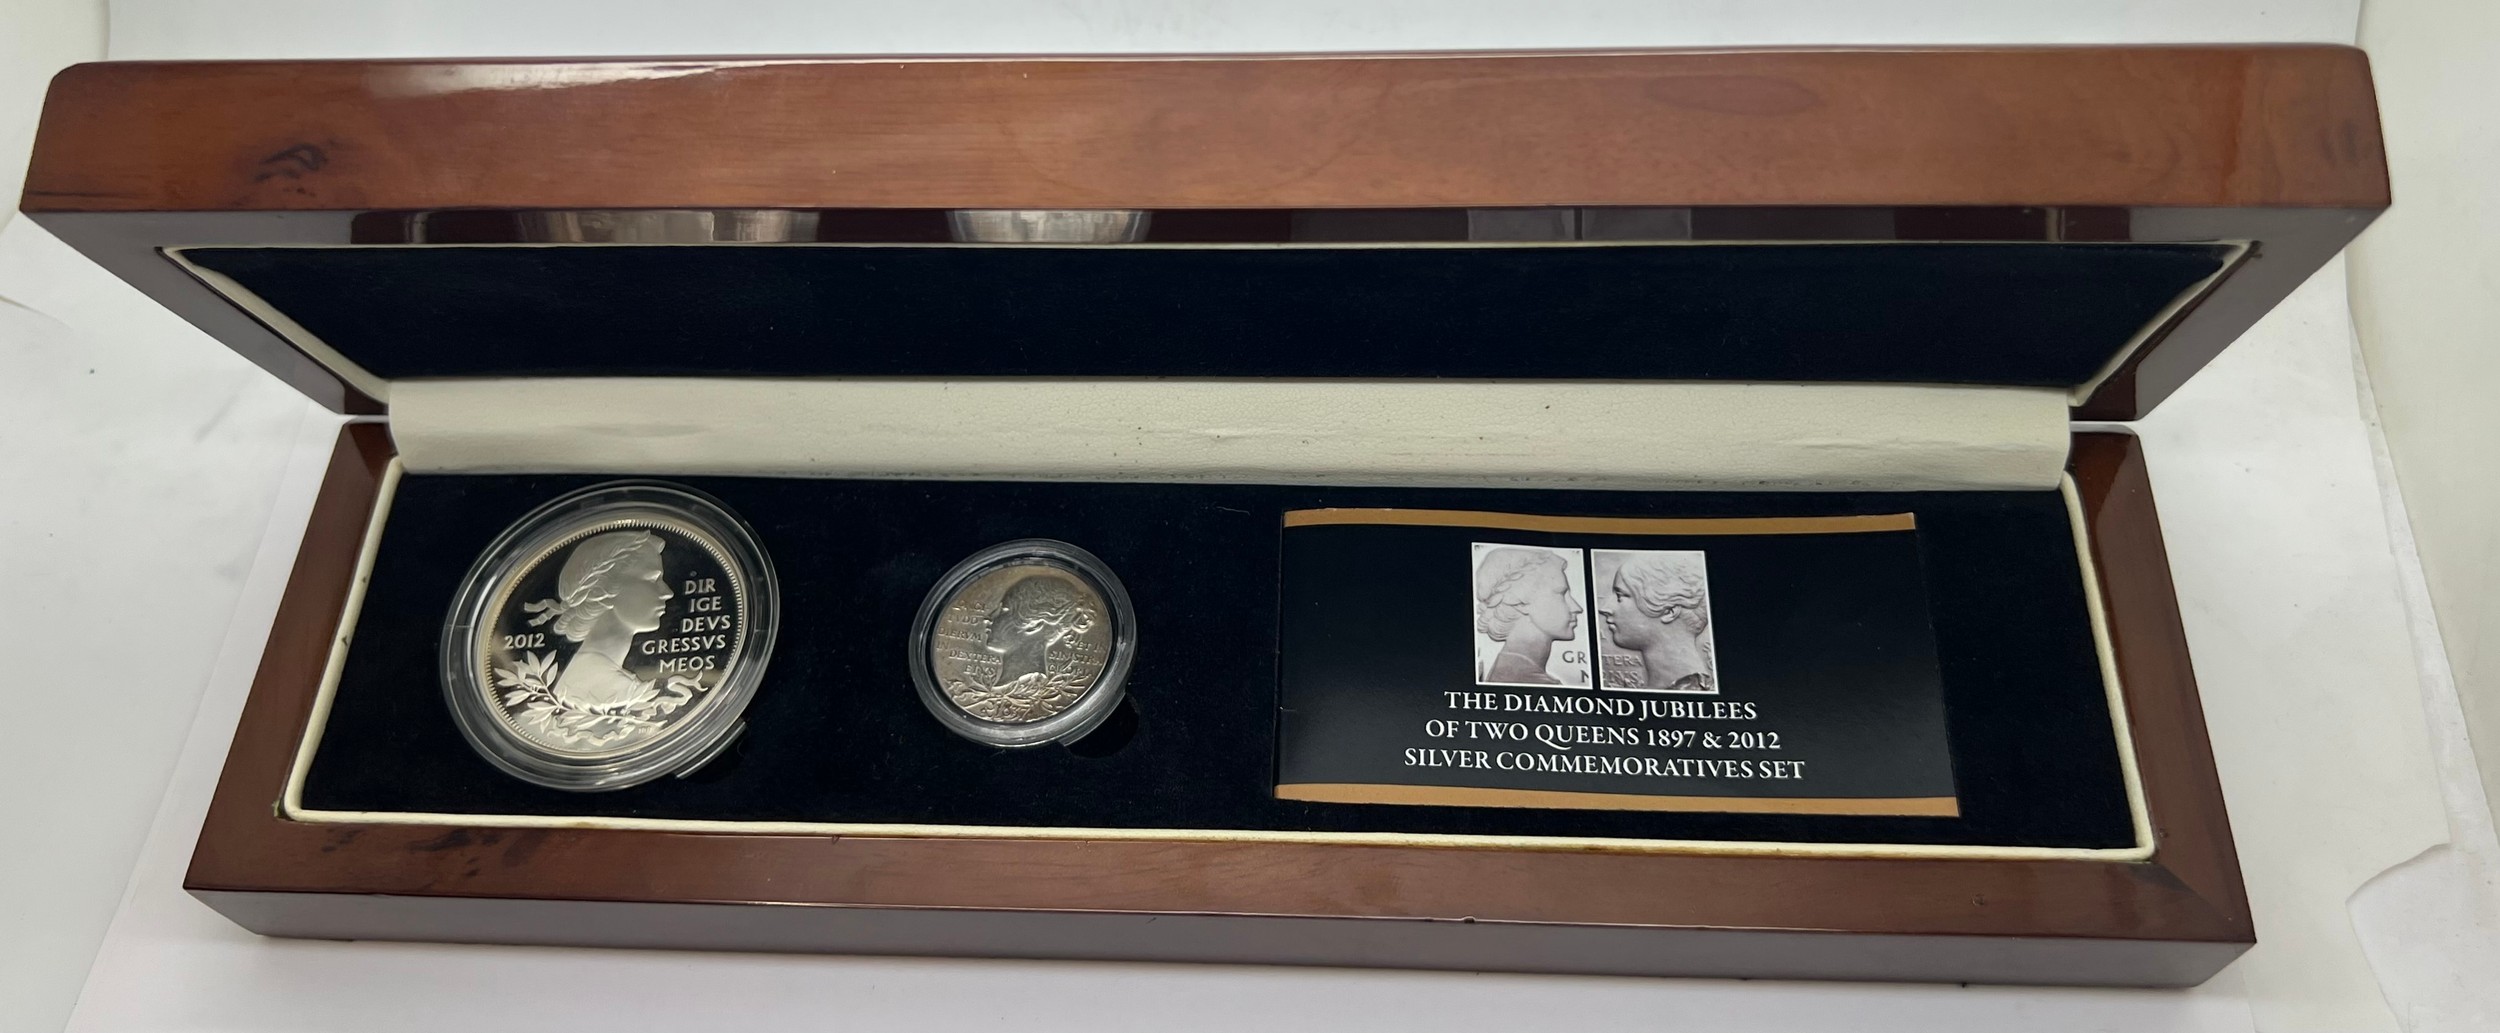 London Mint Office The Diamond Jubilees of Two Queens, 1897 and 2012 silver two crown set, in deluxe